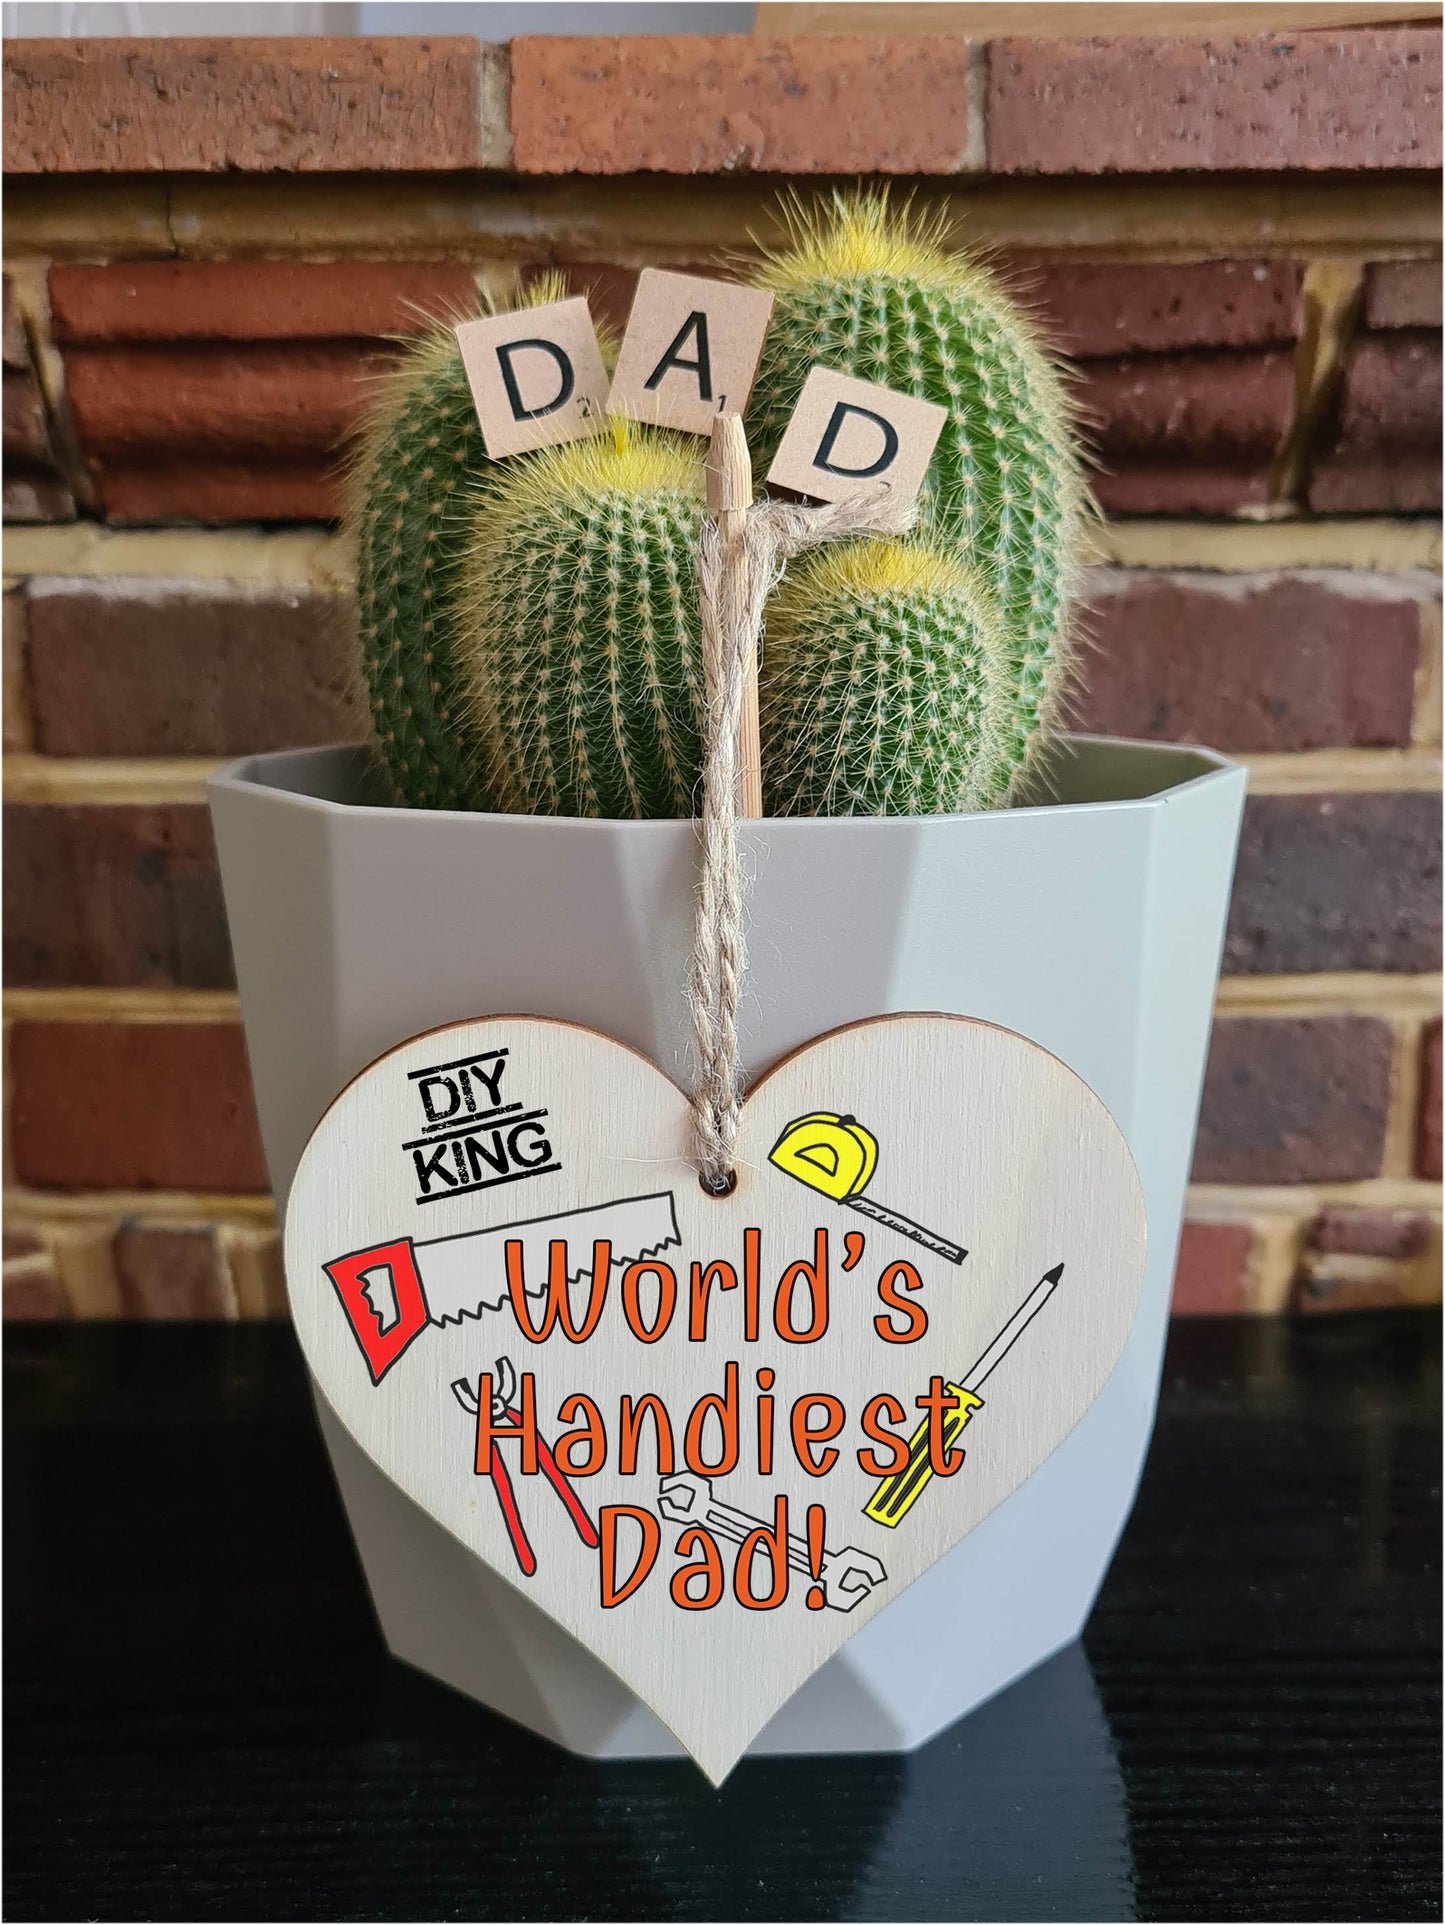 Handmade Wooden Hanging Heart Plaque Gift for Dad this Fathers Day Novelty Fun Thoughtful Keepsake for DIY Fan